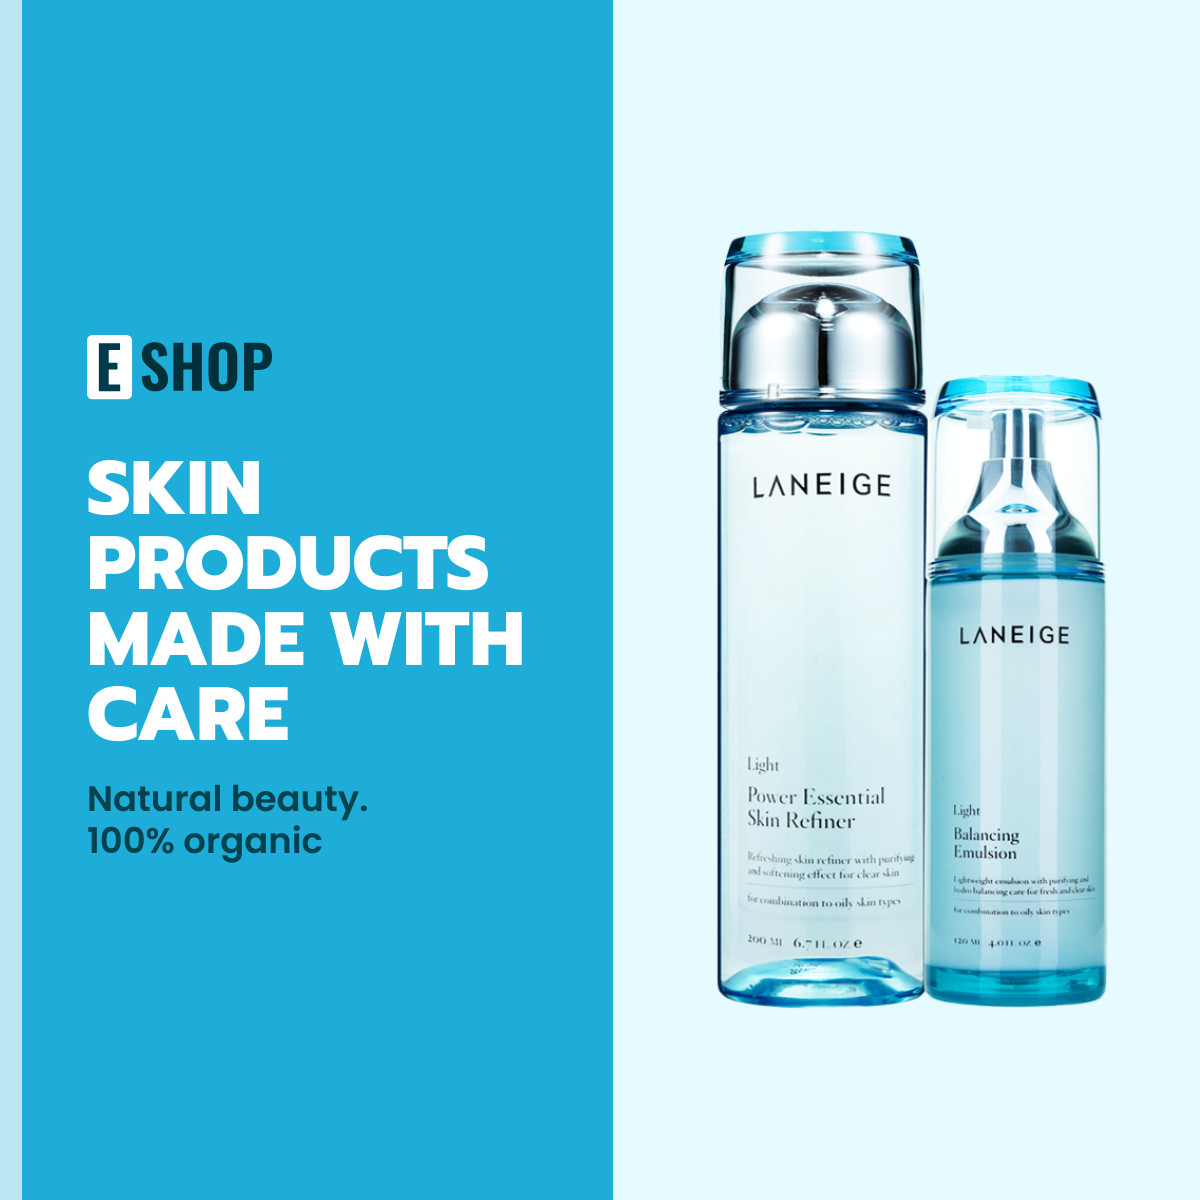 Skin Products Made with Care Inline Rectangle 300x250